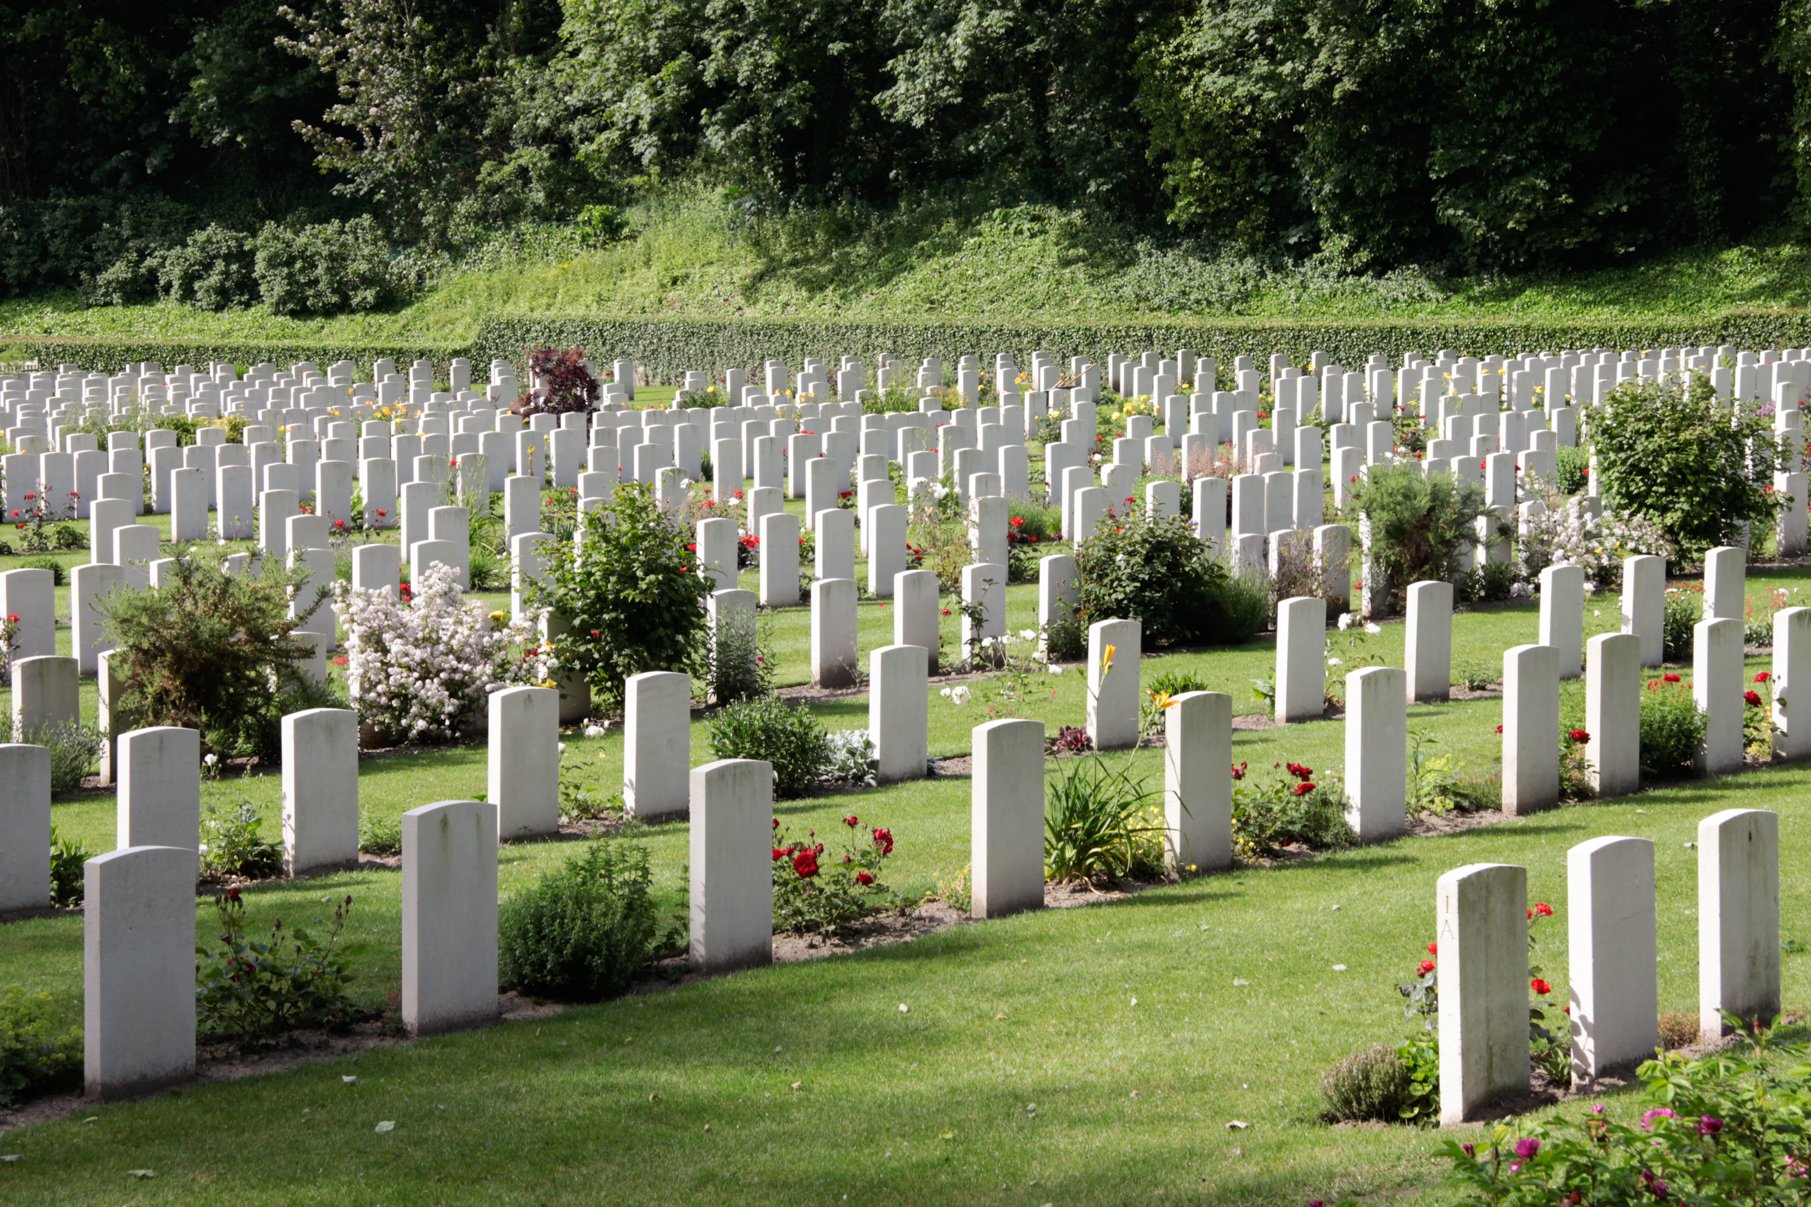 Photo of Coxyde Military Cemetery. Rows of white headstones on grass with a line of plants in front of each row.